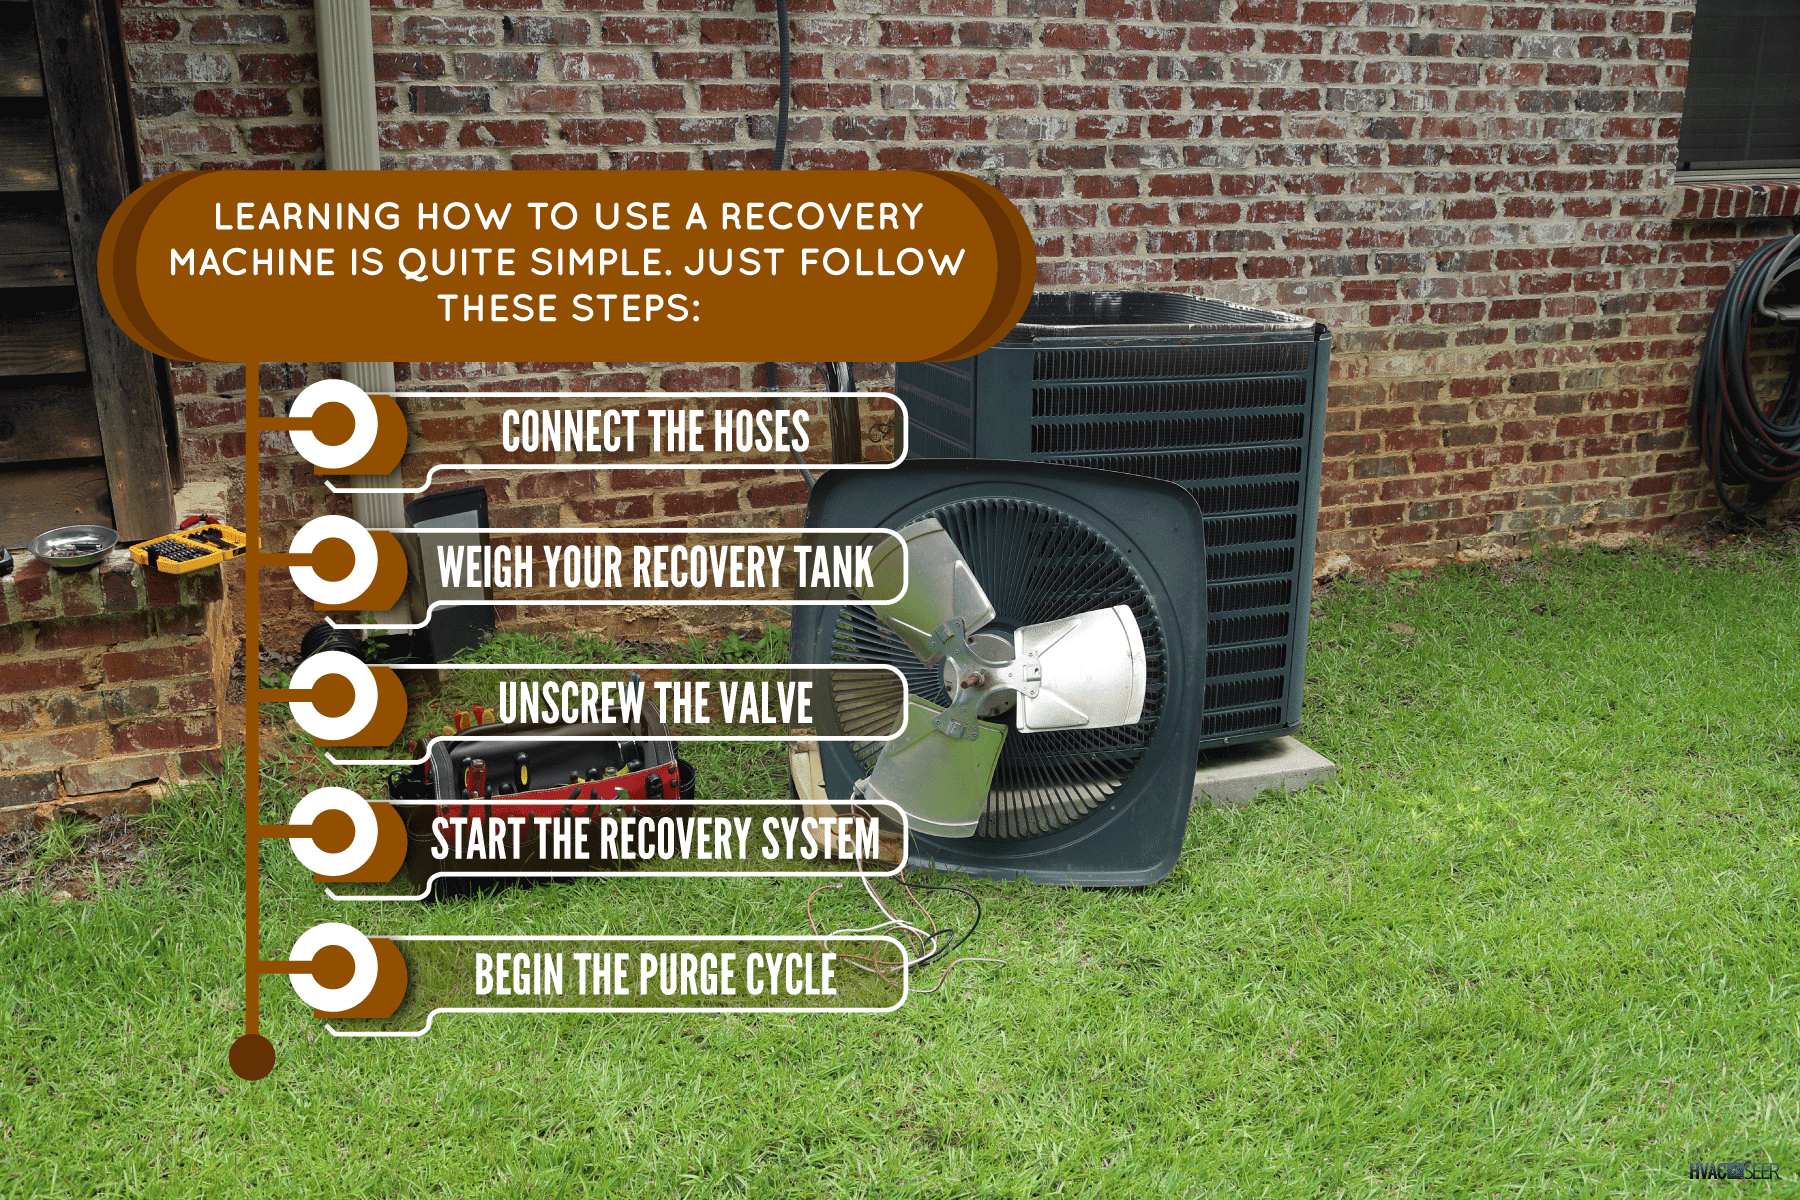 Air conditioning unit placed outside a house, How To Use A Recovery Machine For HVAC [Complete Guide With Detailed Instructions]